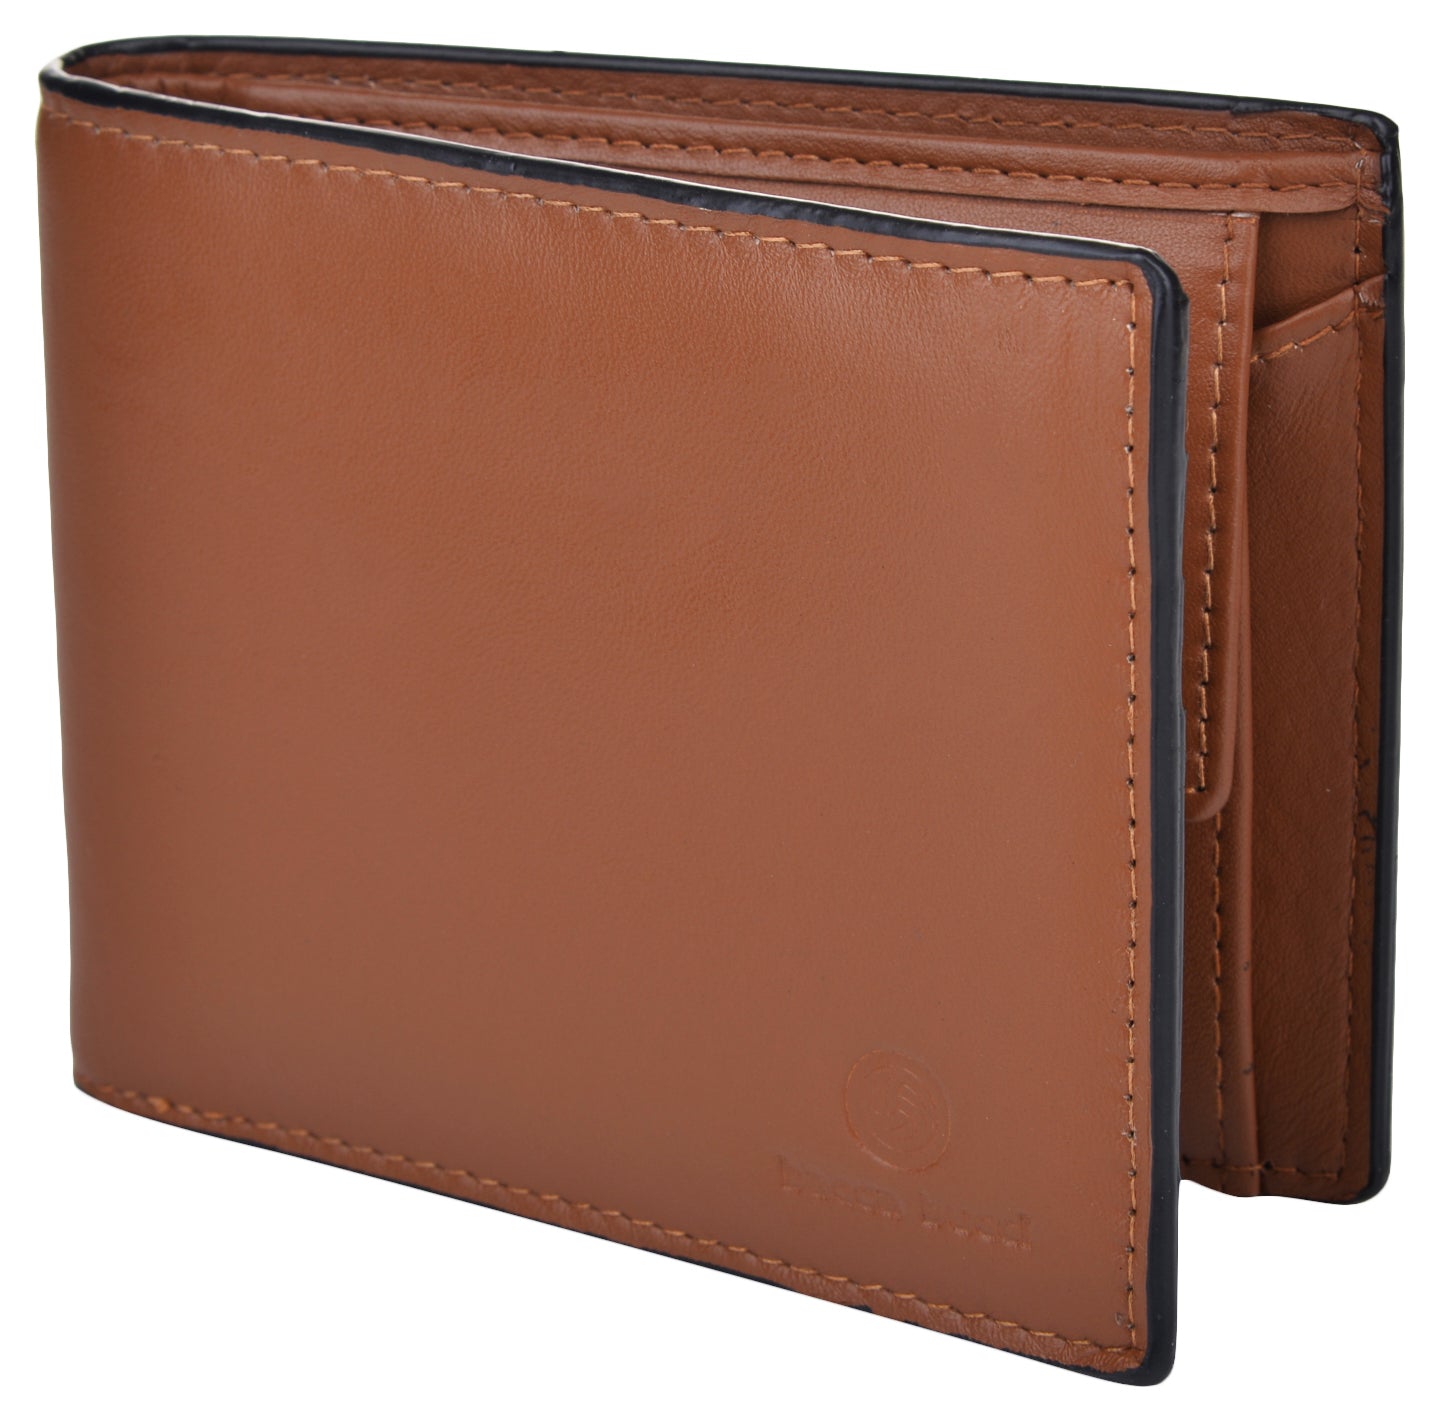 Buy Richborn Gents Leather Purse With Multiple Pockets at Best Price